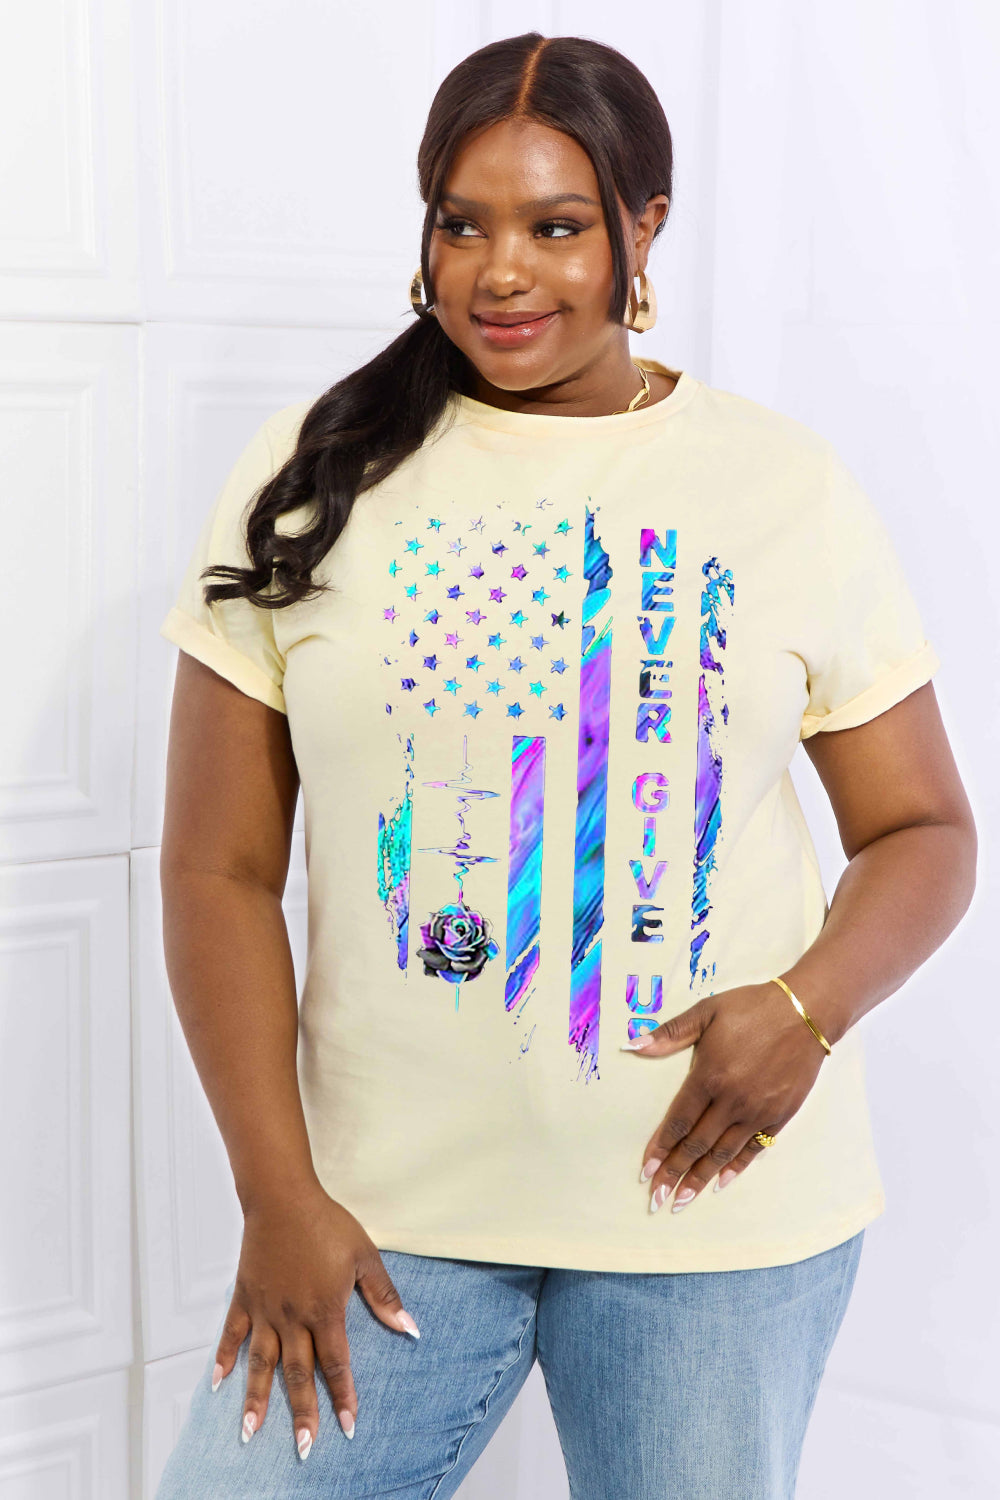 NEVER GIVE UP Graphic Cotton Tee - T-Shirts - Shirts & Tops - 9 - 2024